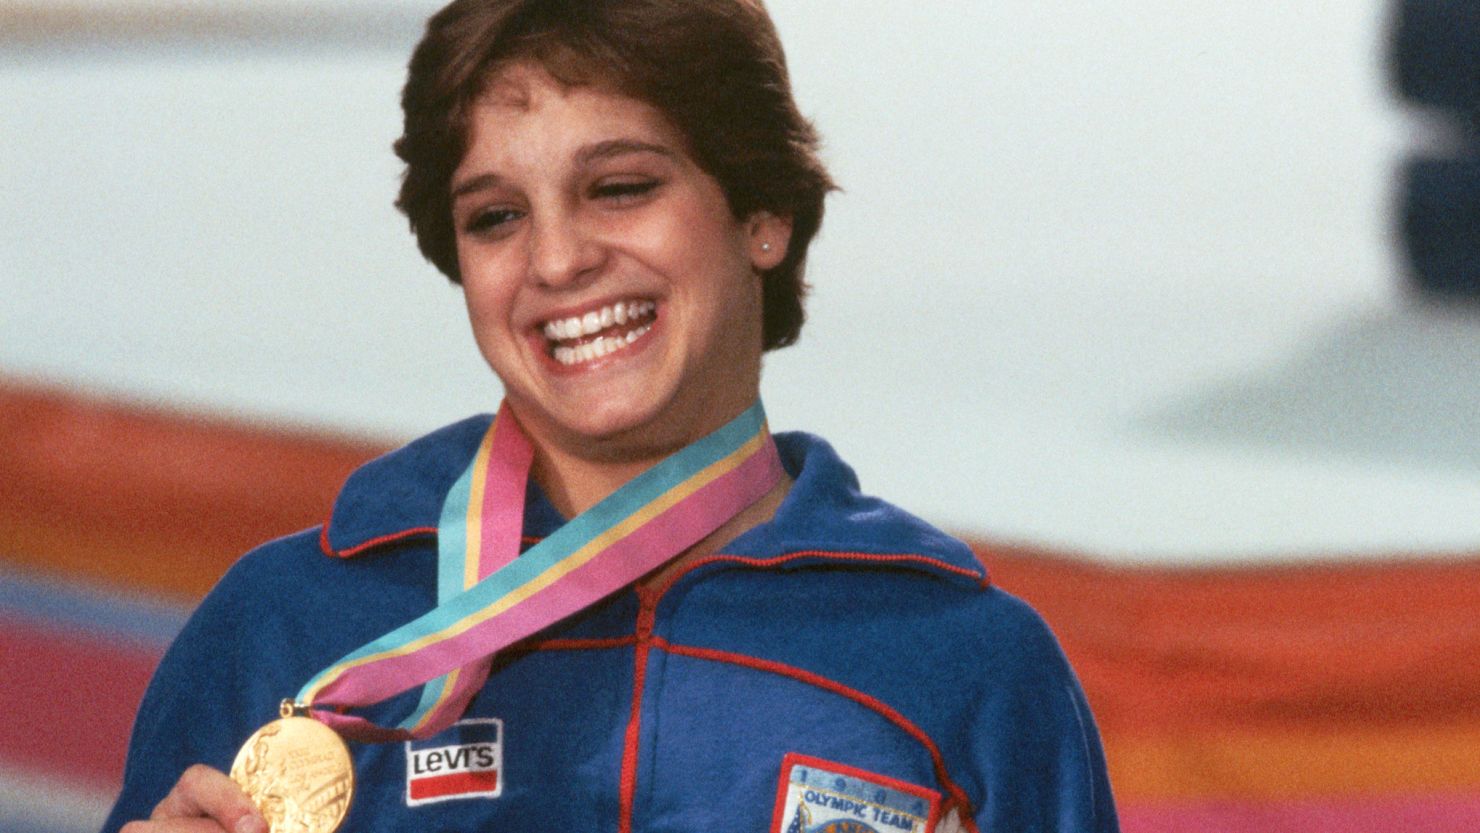 Gold medal winner Mary Lou Retton poses for a photograph after the awards ceremony for the Women's Gymnastics Combined event at the 1984 Los Angeles Summer Olympic Games.